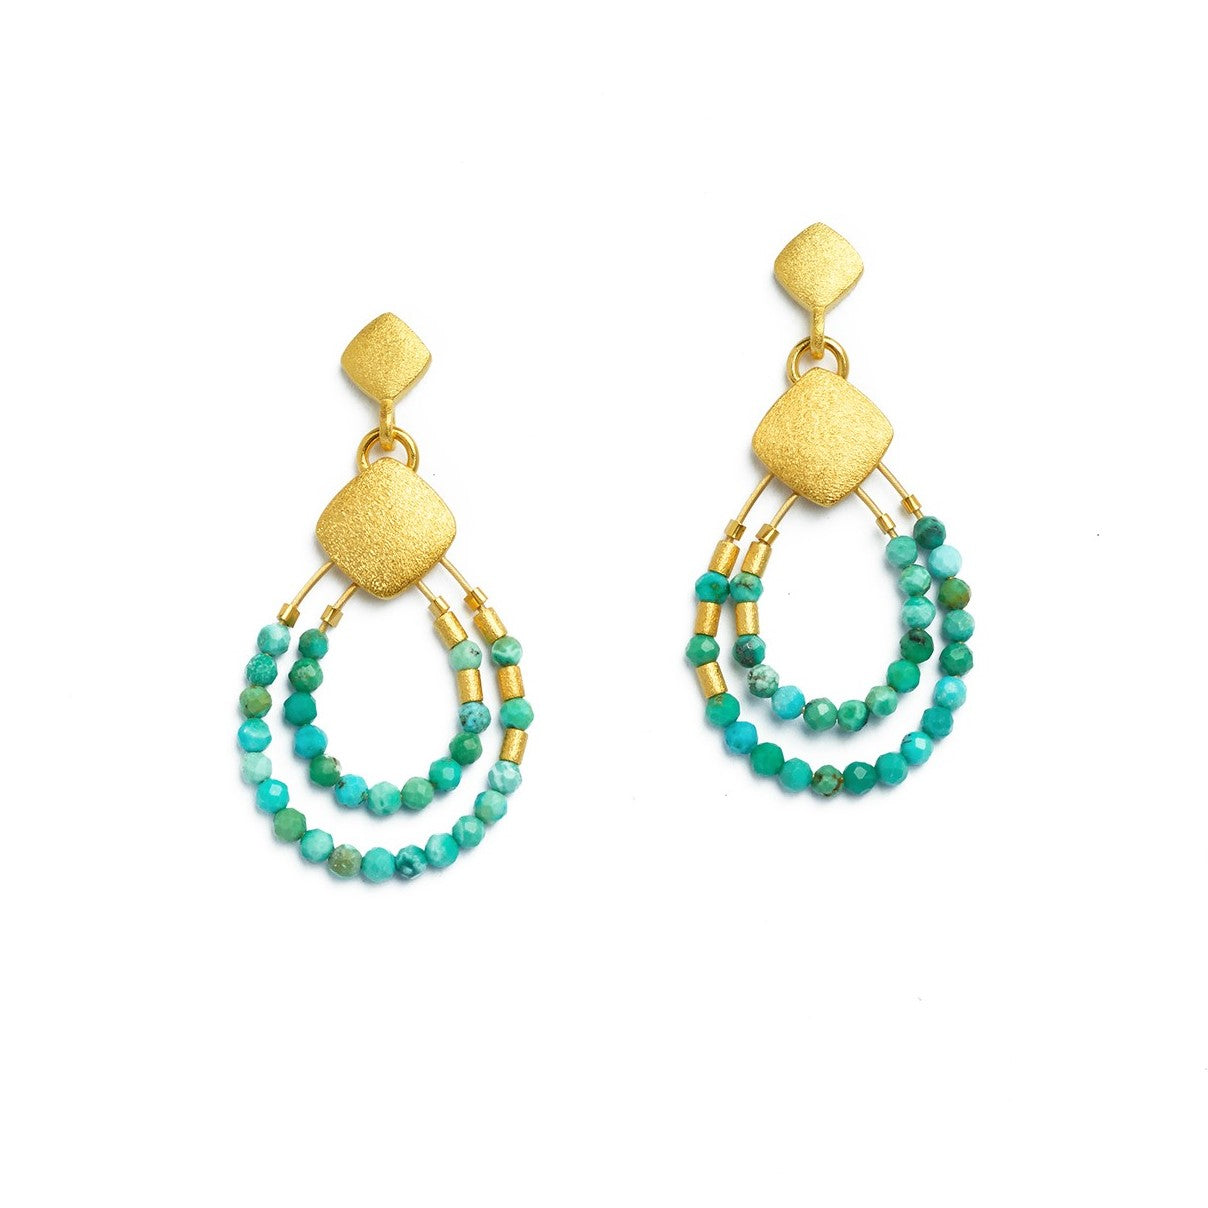 Bernd Wolf Collection "Climini" Turquoise Earrings